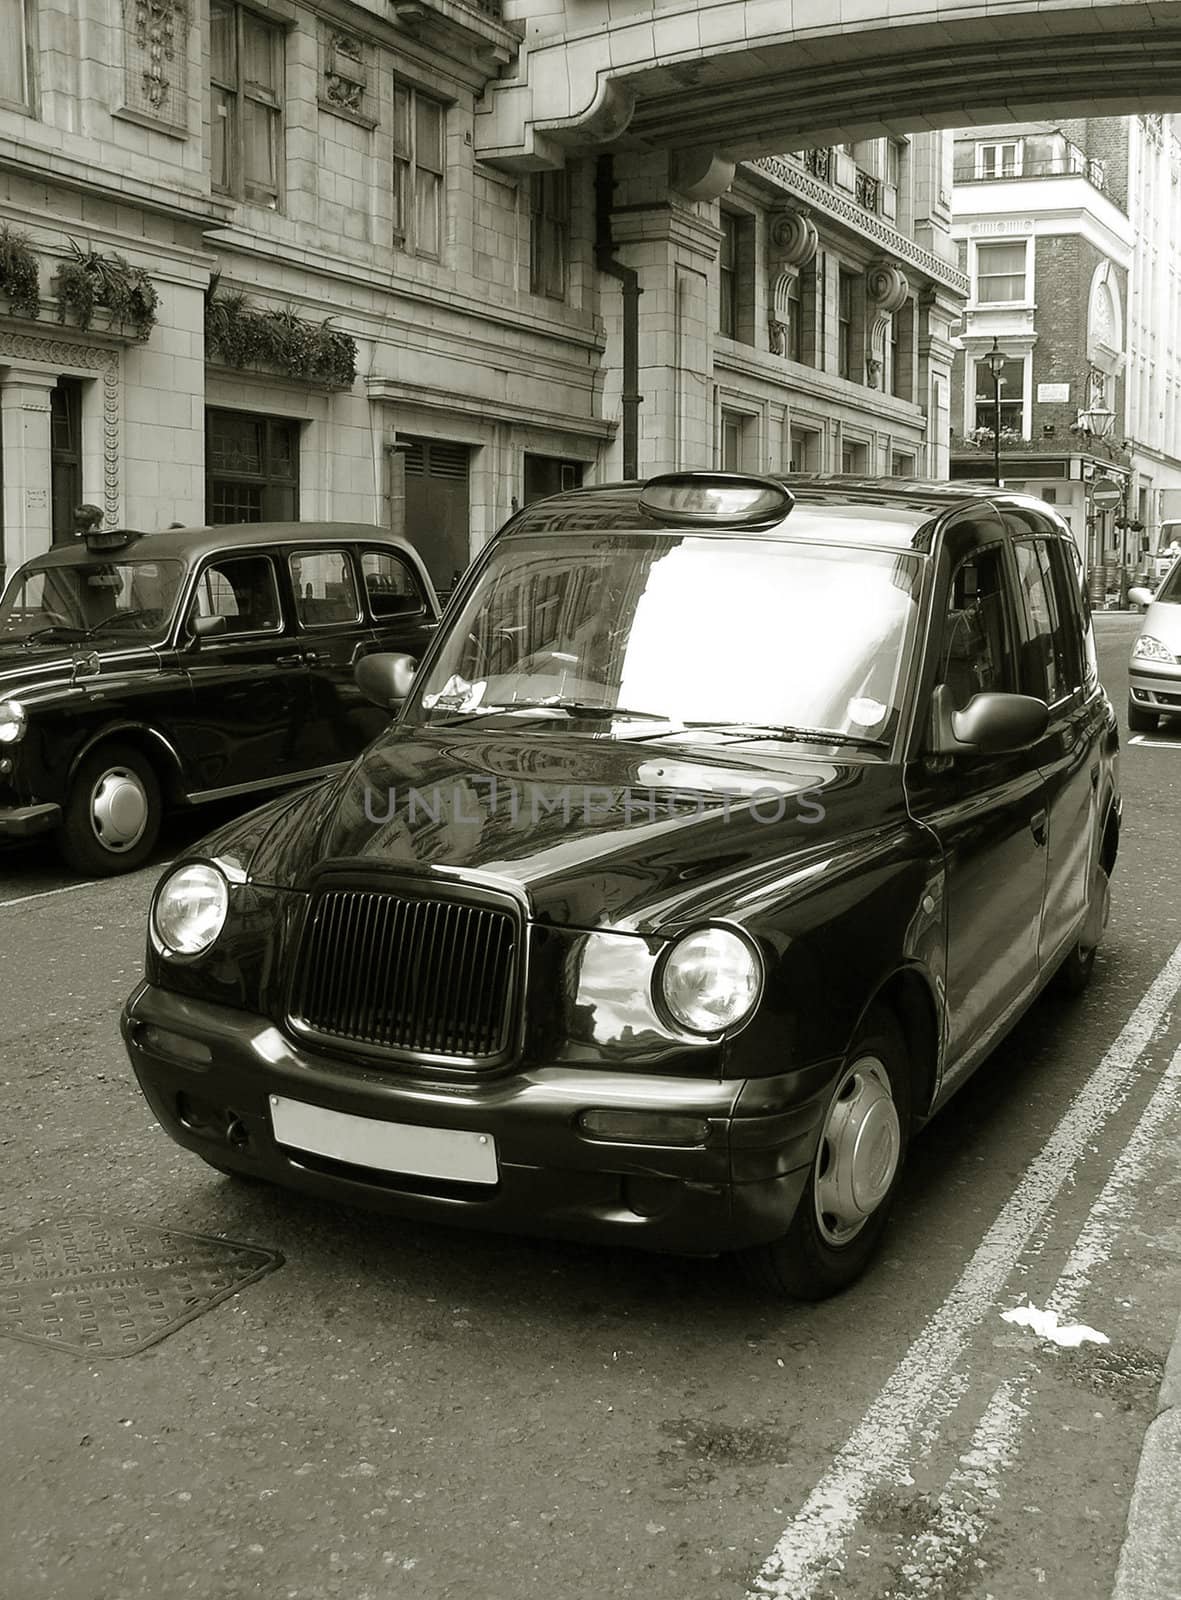 Classic London cab on the street. Old Sepia toned photo.